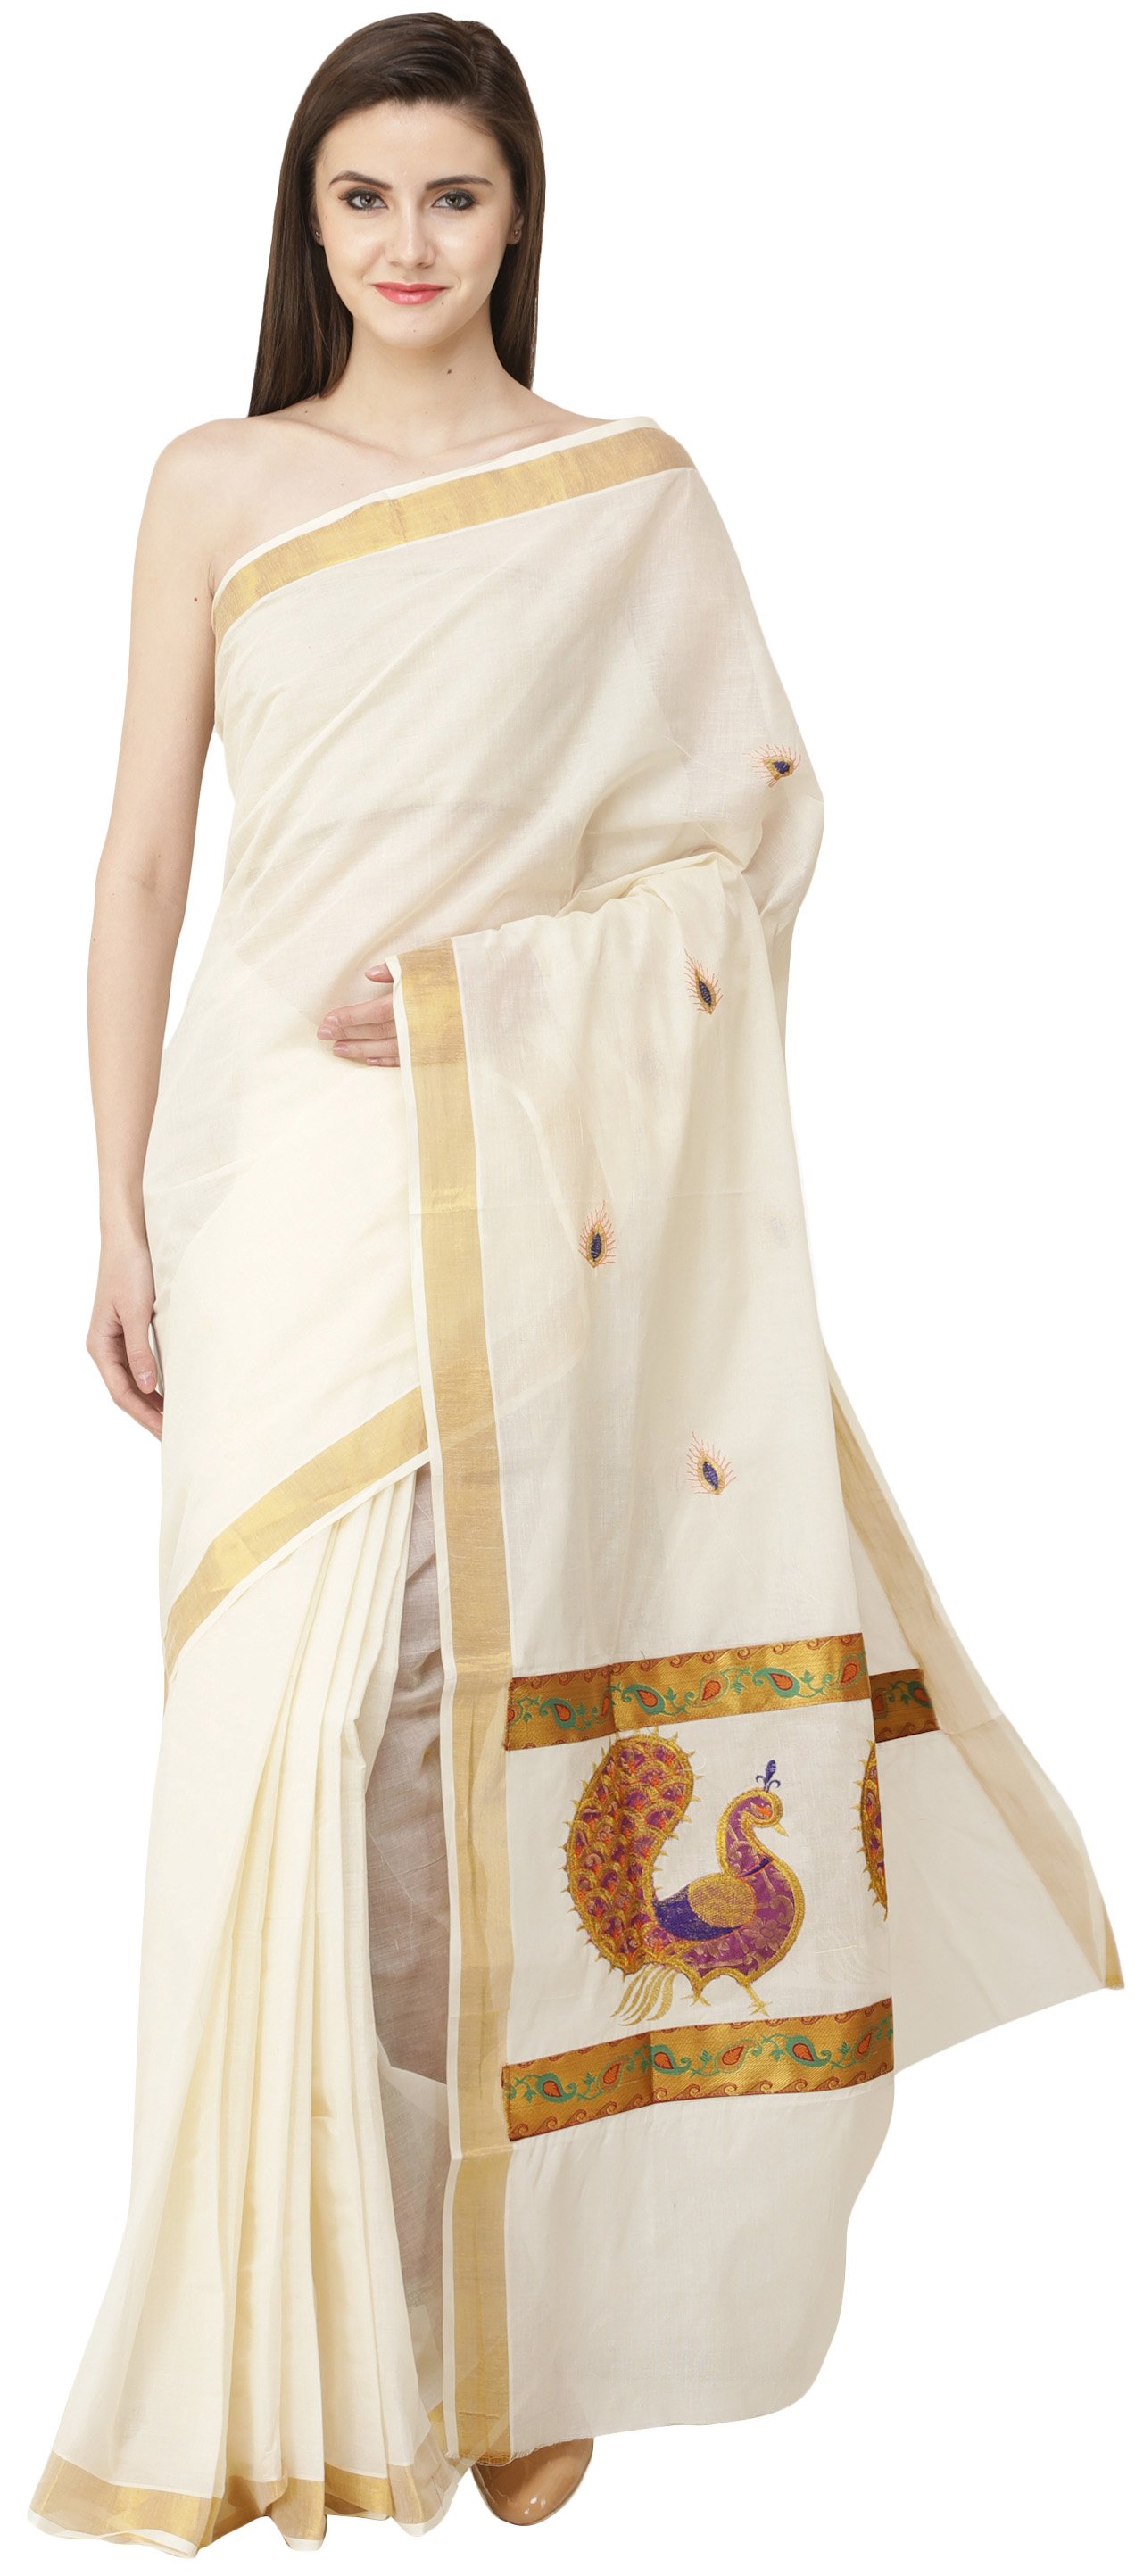 Ivory Kasavu Sari From Kerala With Embroidered Peacocks And Golden Border Exotic India Art 